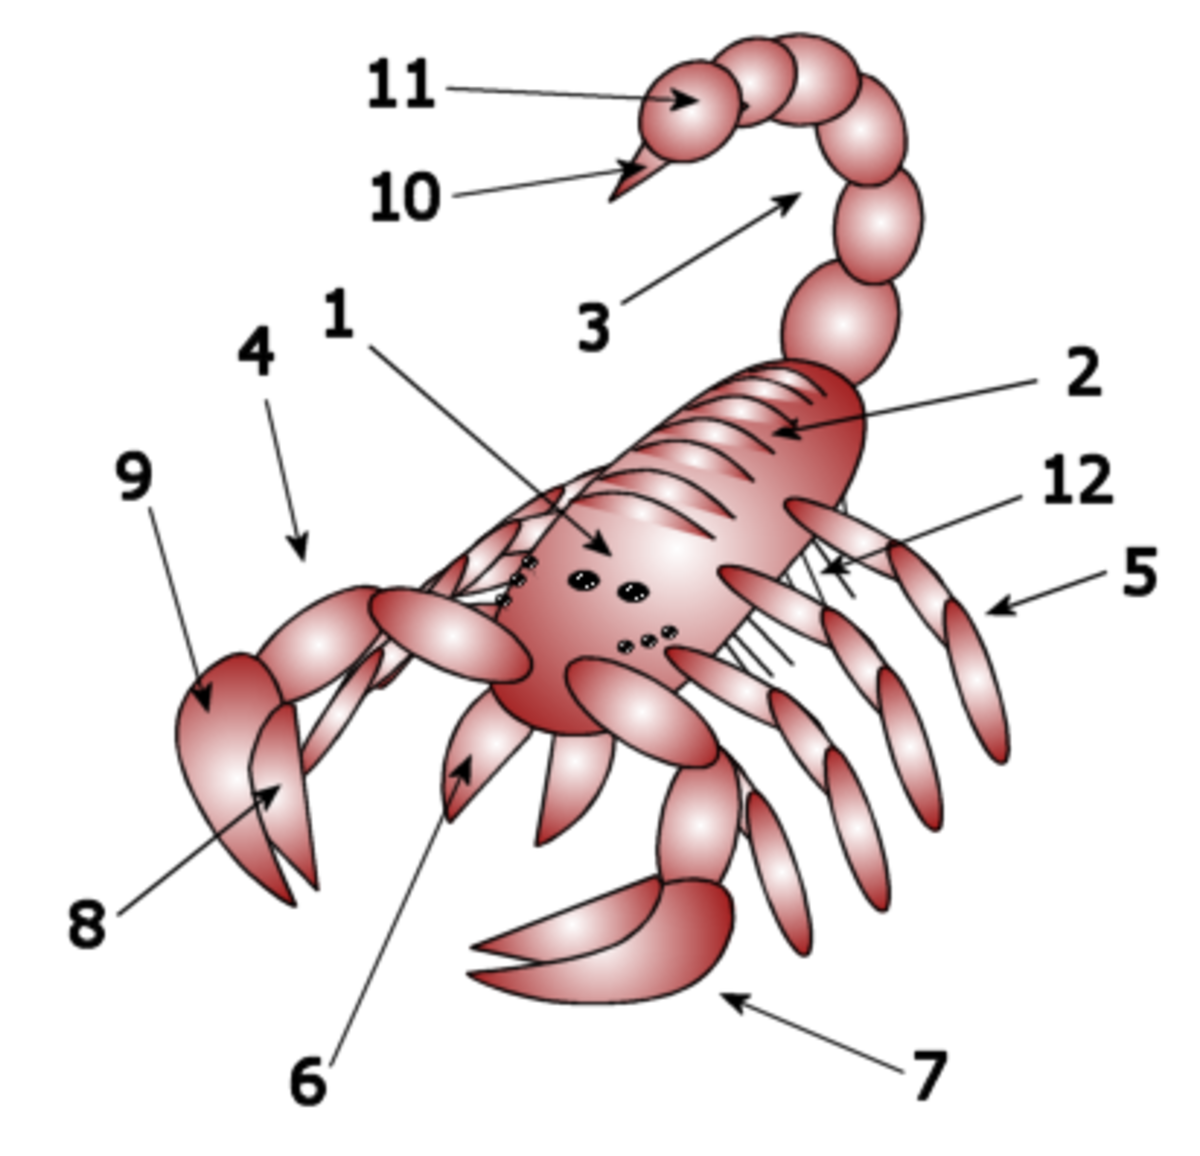 Labeled Diagram of a Scorpion. Image Credit: Wikimedia Commons